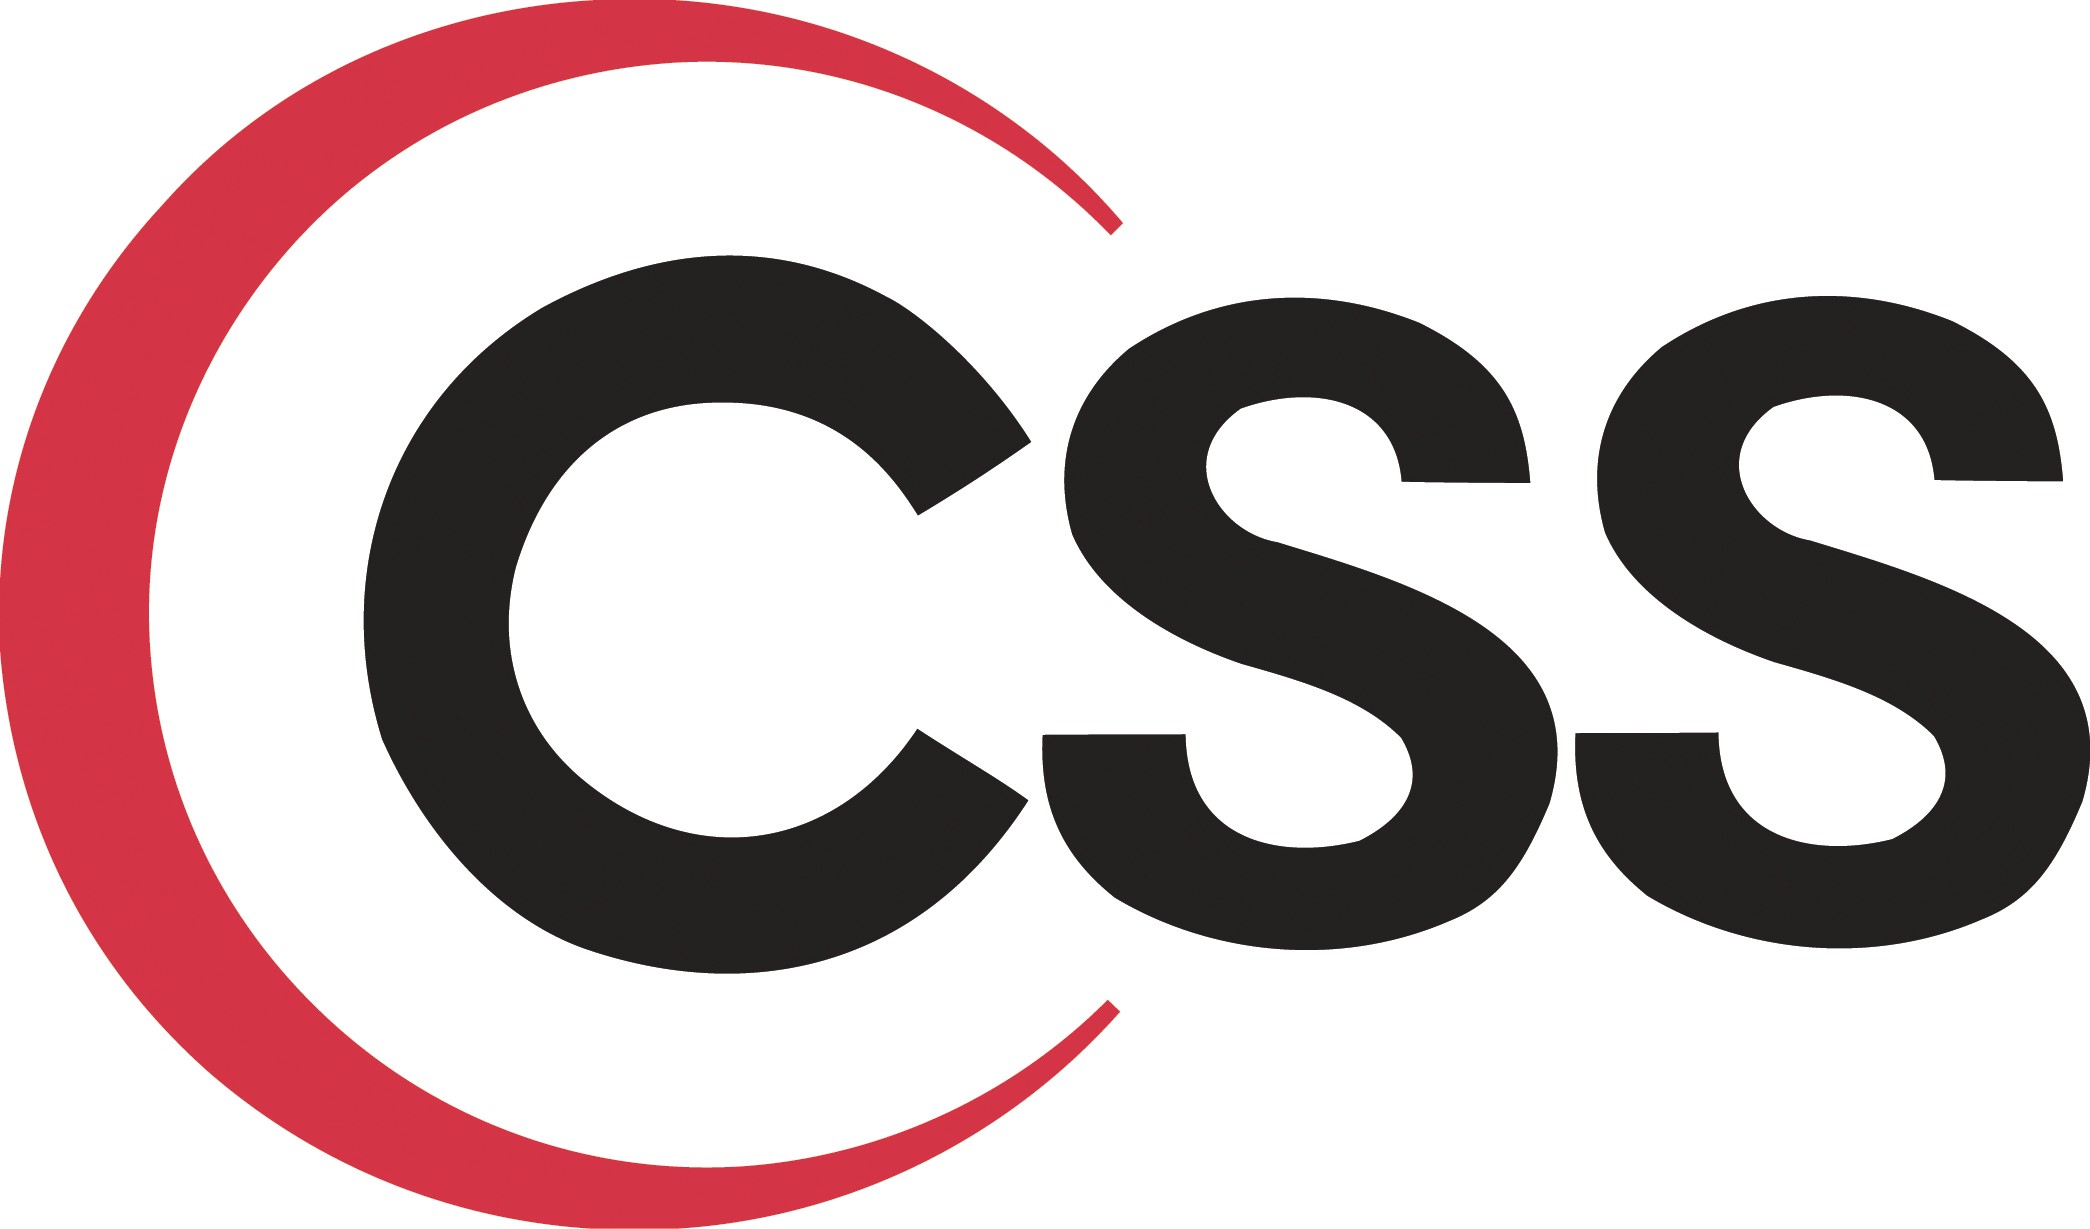 What Is CSS3? Cascading Style Sheets Level 3